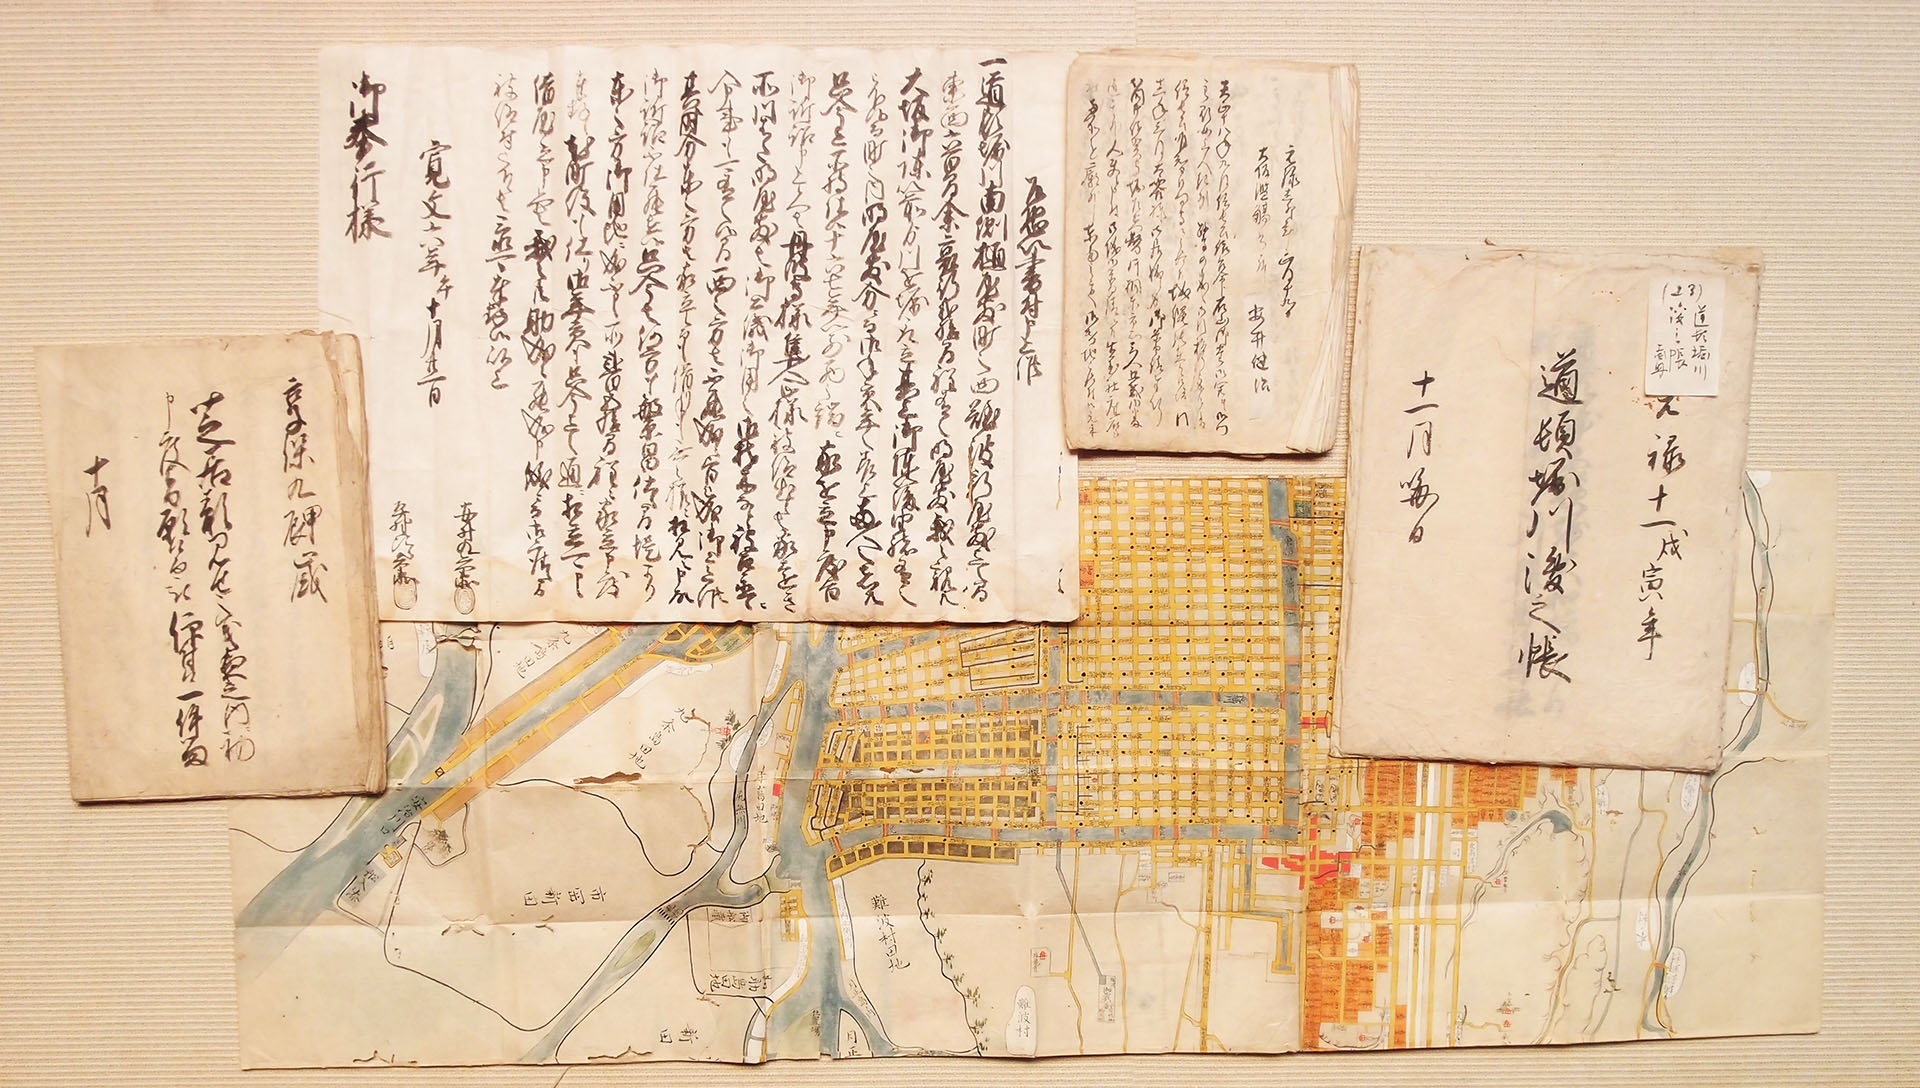 P01-02 – Lecture 2: Early Modern History II “The Yasui House Documents and Development of Dōtonbori”